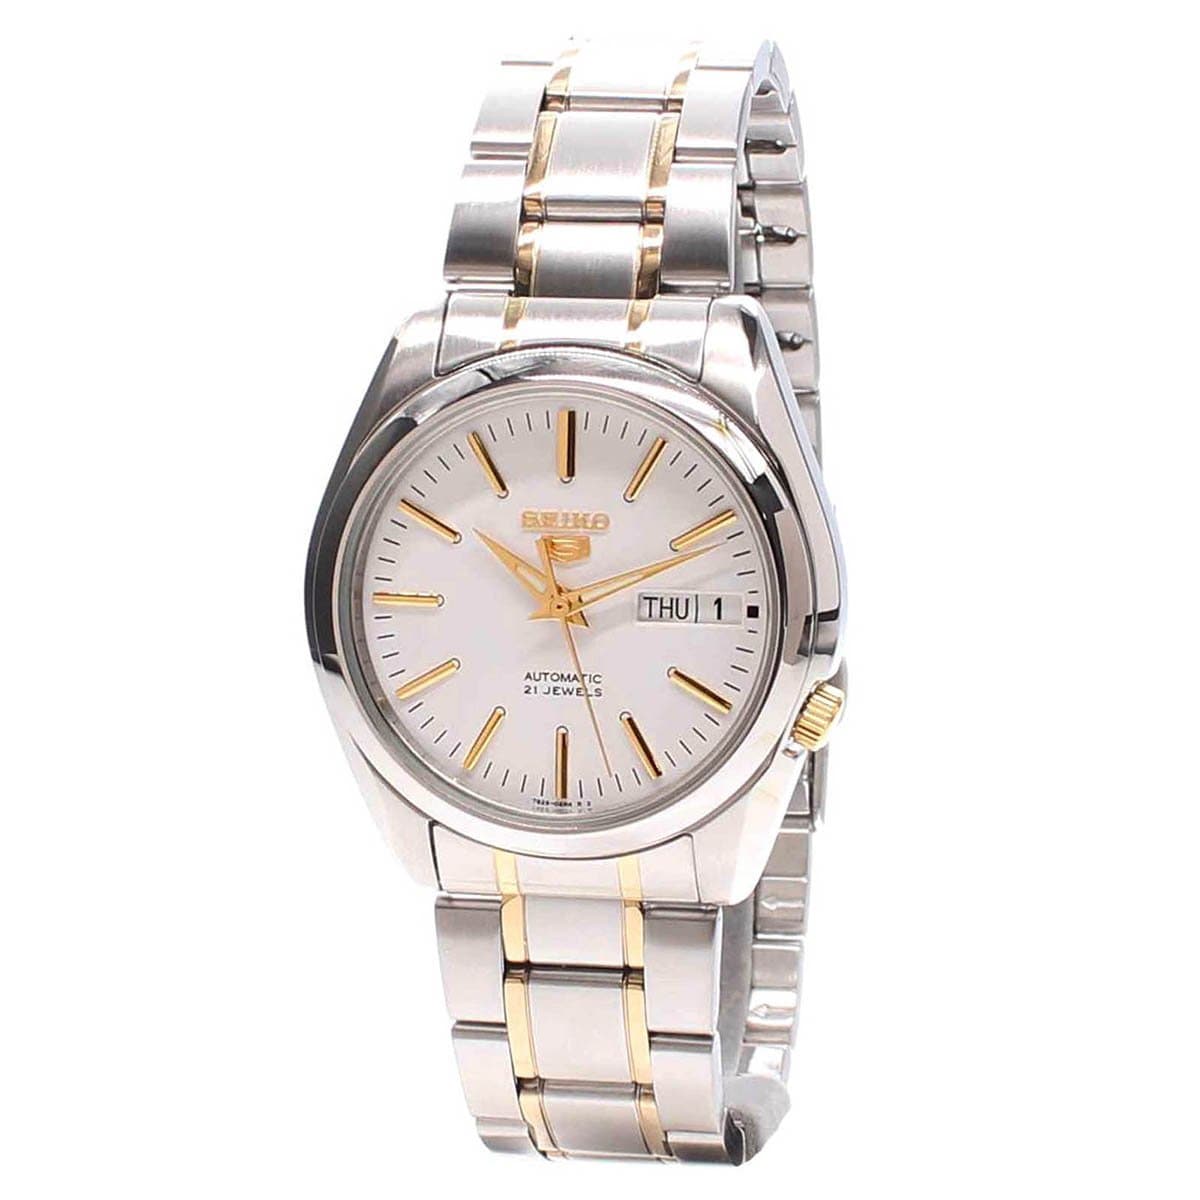 Seiko 5 Classic Mens Size White Dial 2 Tone Gold Plated Stainless Steel Strap Watch SNKL47K1 - Diligence1International